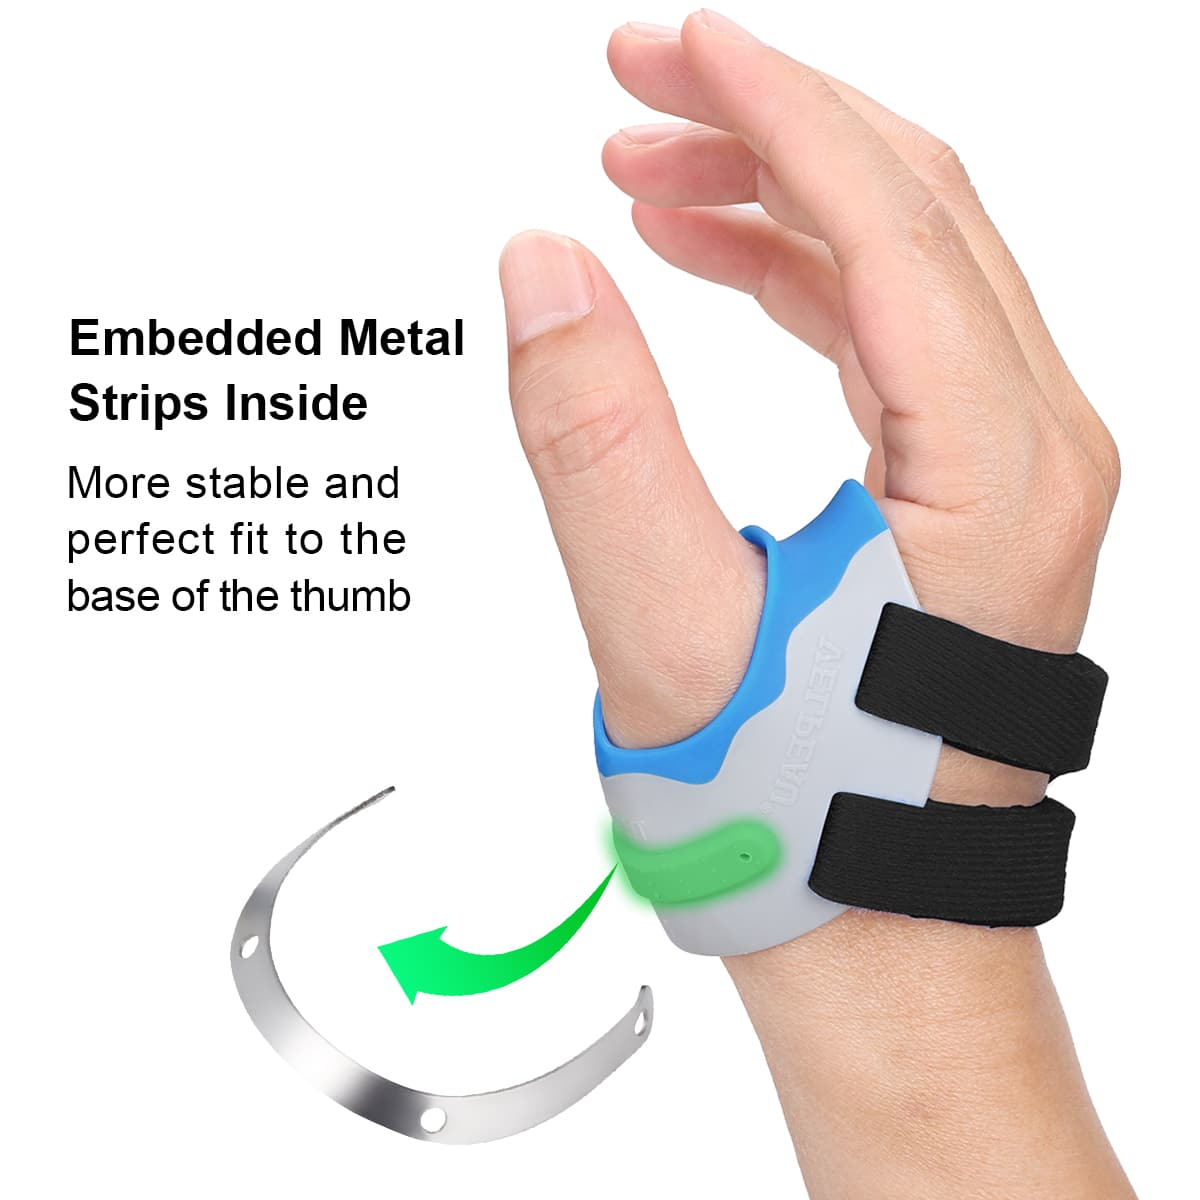 VELPEAU CMC Thumb Orthosis Relieves Arthritis Pain At The Bottom of Thumb Lightweight and Breathable Support Brace With Sleeve